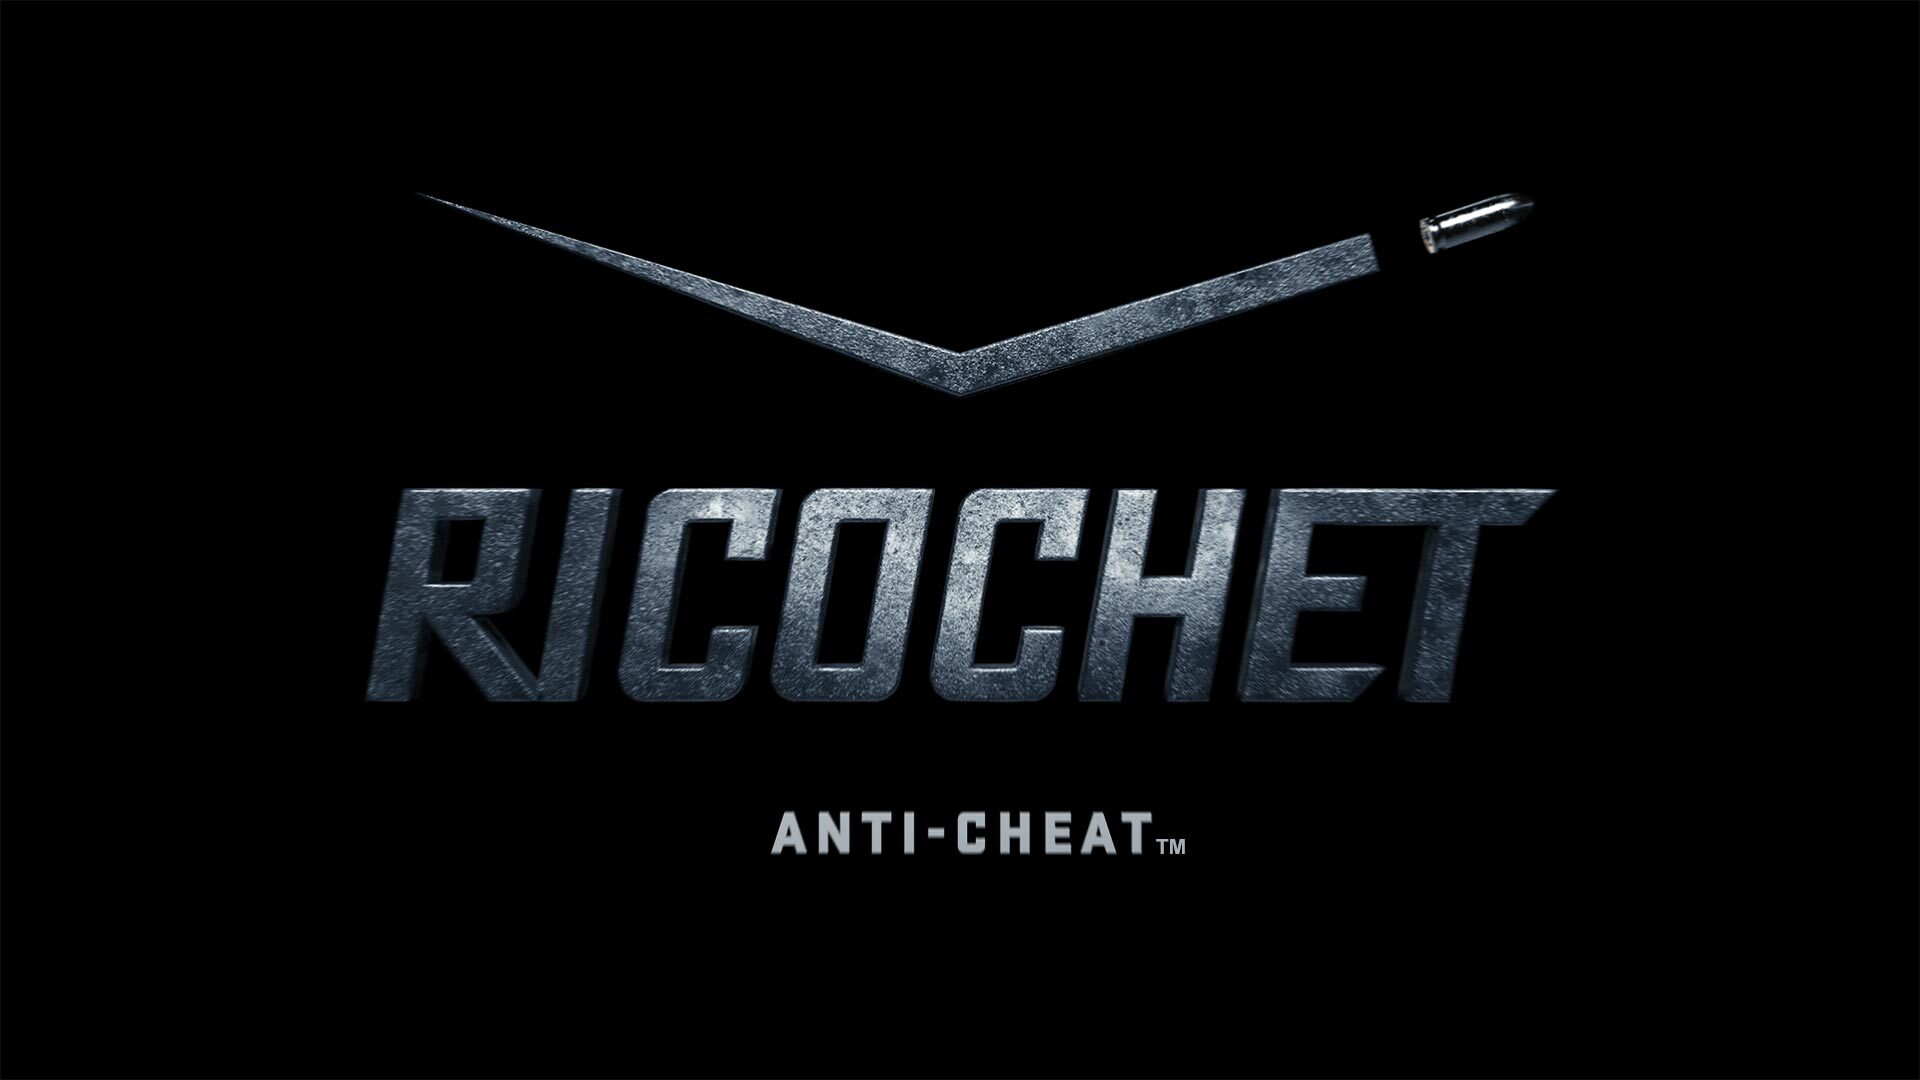 Ricochet is Call of Duty's anti-cheat software. It has been banning MW2 players. 